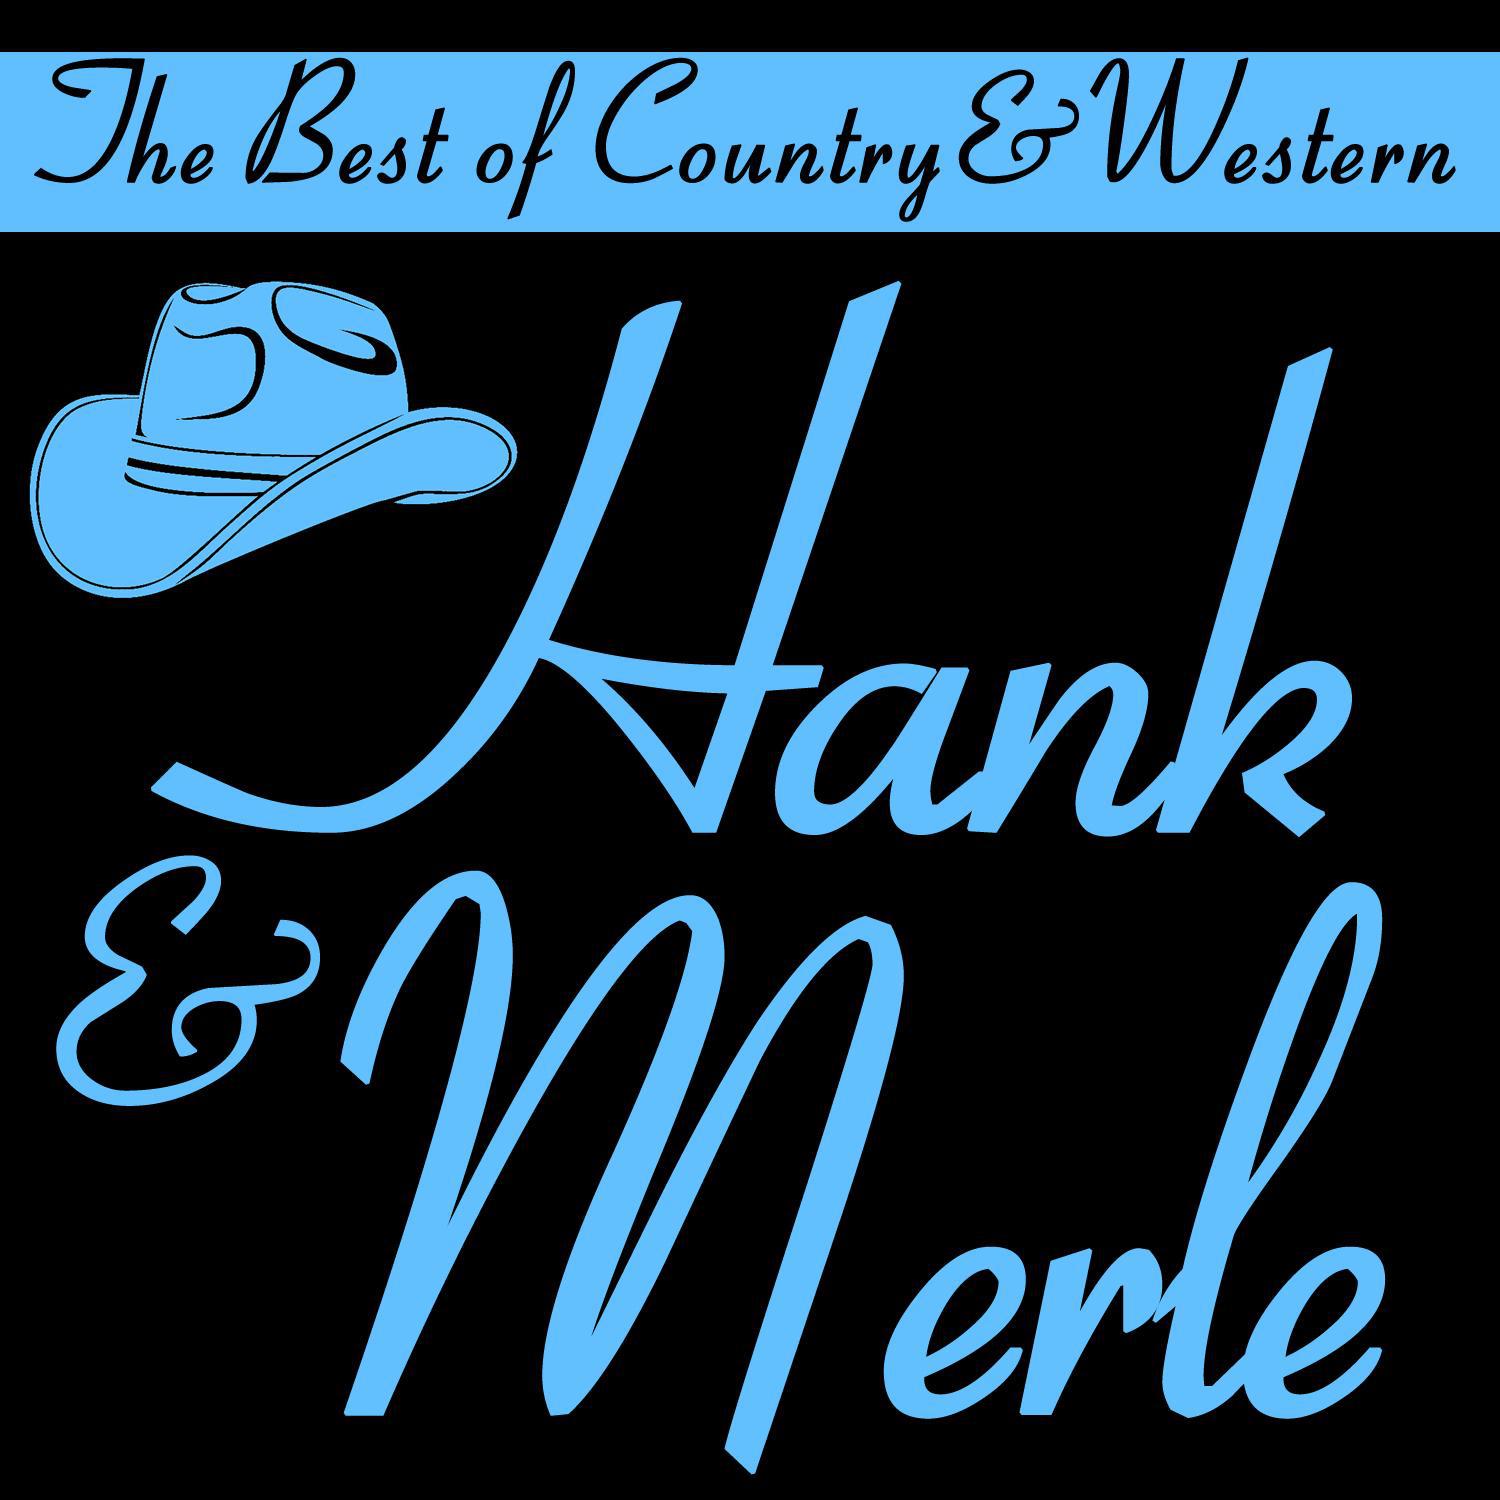 The Best of Country & Western, Hank & Merle: Your Cheatin' Heart, Okie from Muskogee, Drink up and Be Somebody, Hey, Good Lookin' & More Classic Country Hits